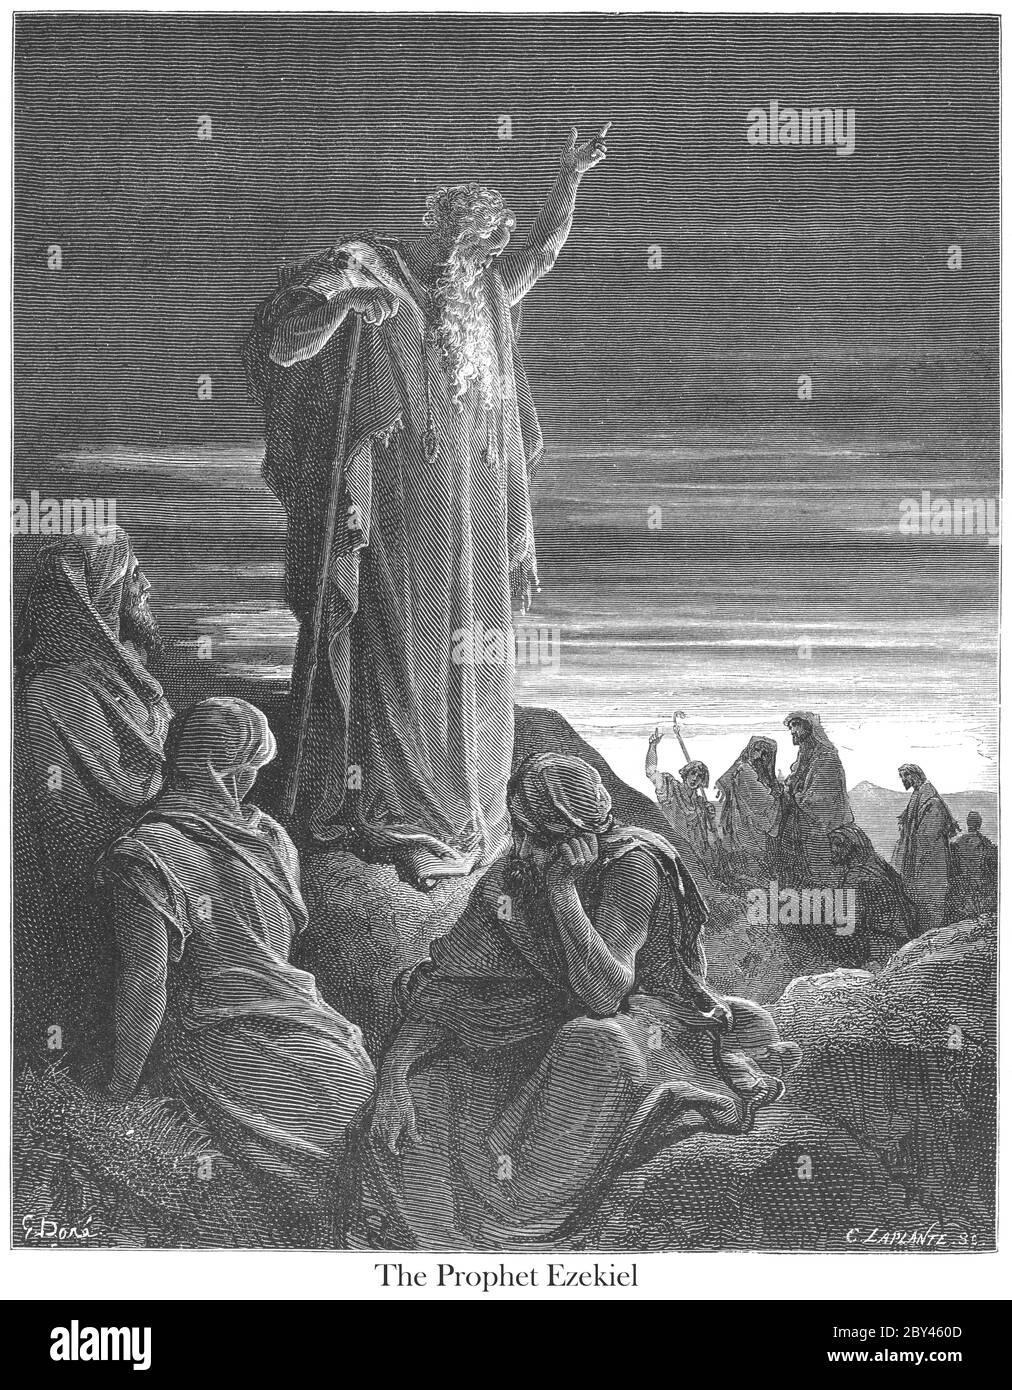 The Prophet Ezekiel Ezekiel 1:3 From the book 'Bible Gallery' Illustrated by Gustave Dore with Memoir of Dore and Descriptive Letter-press by Talbot W. Chambers D.D. Published by Cassell & Company Limited in London and simultaneously by Mame in Tours, France in 1866 Stock Photo